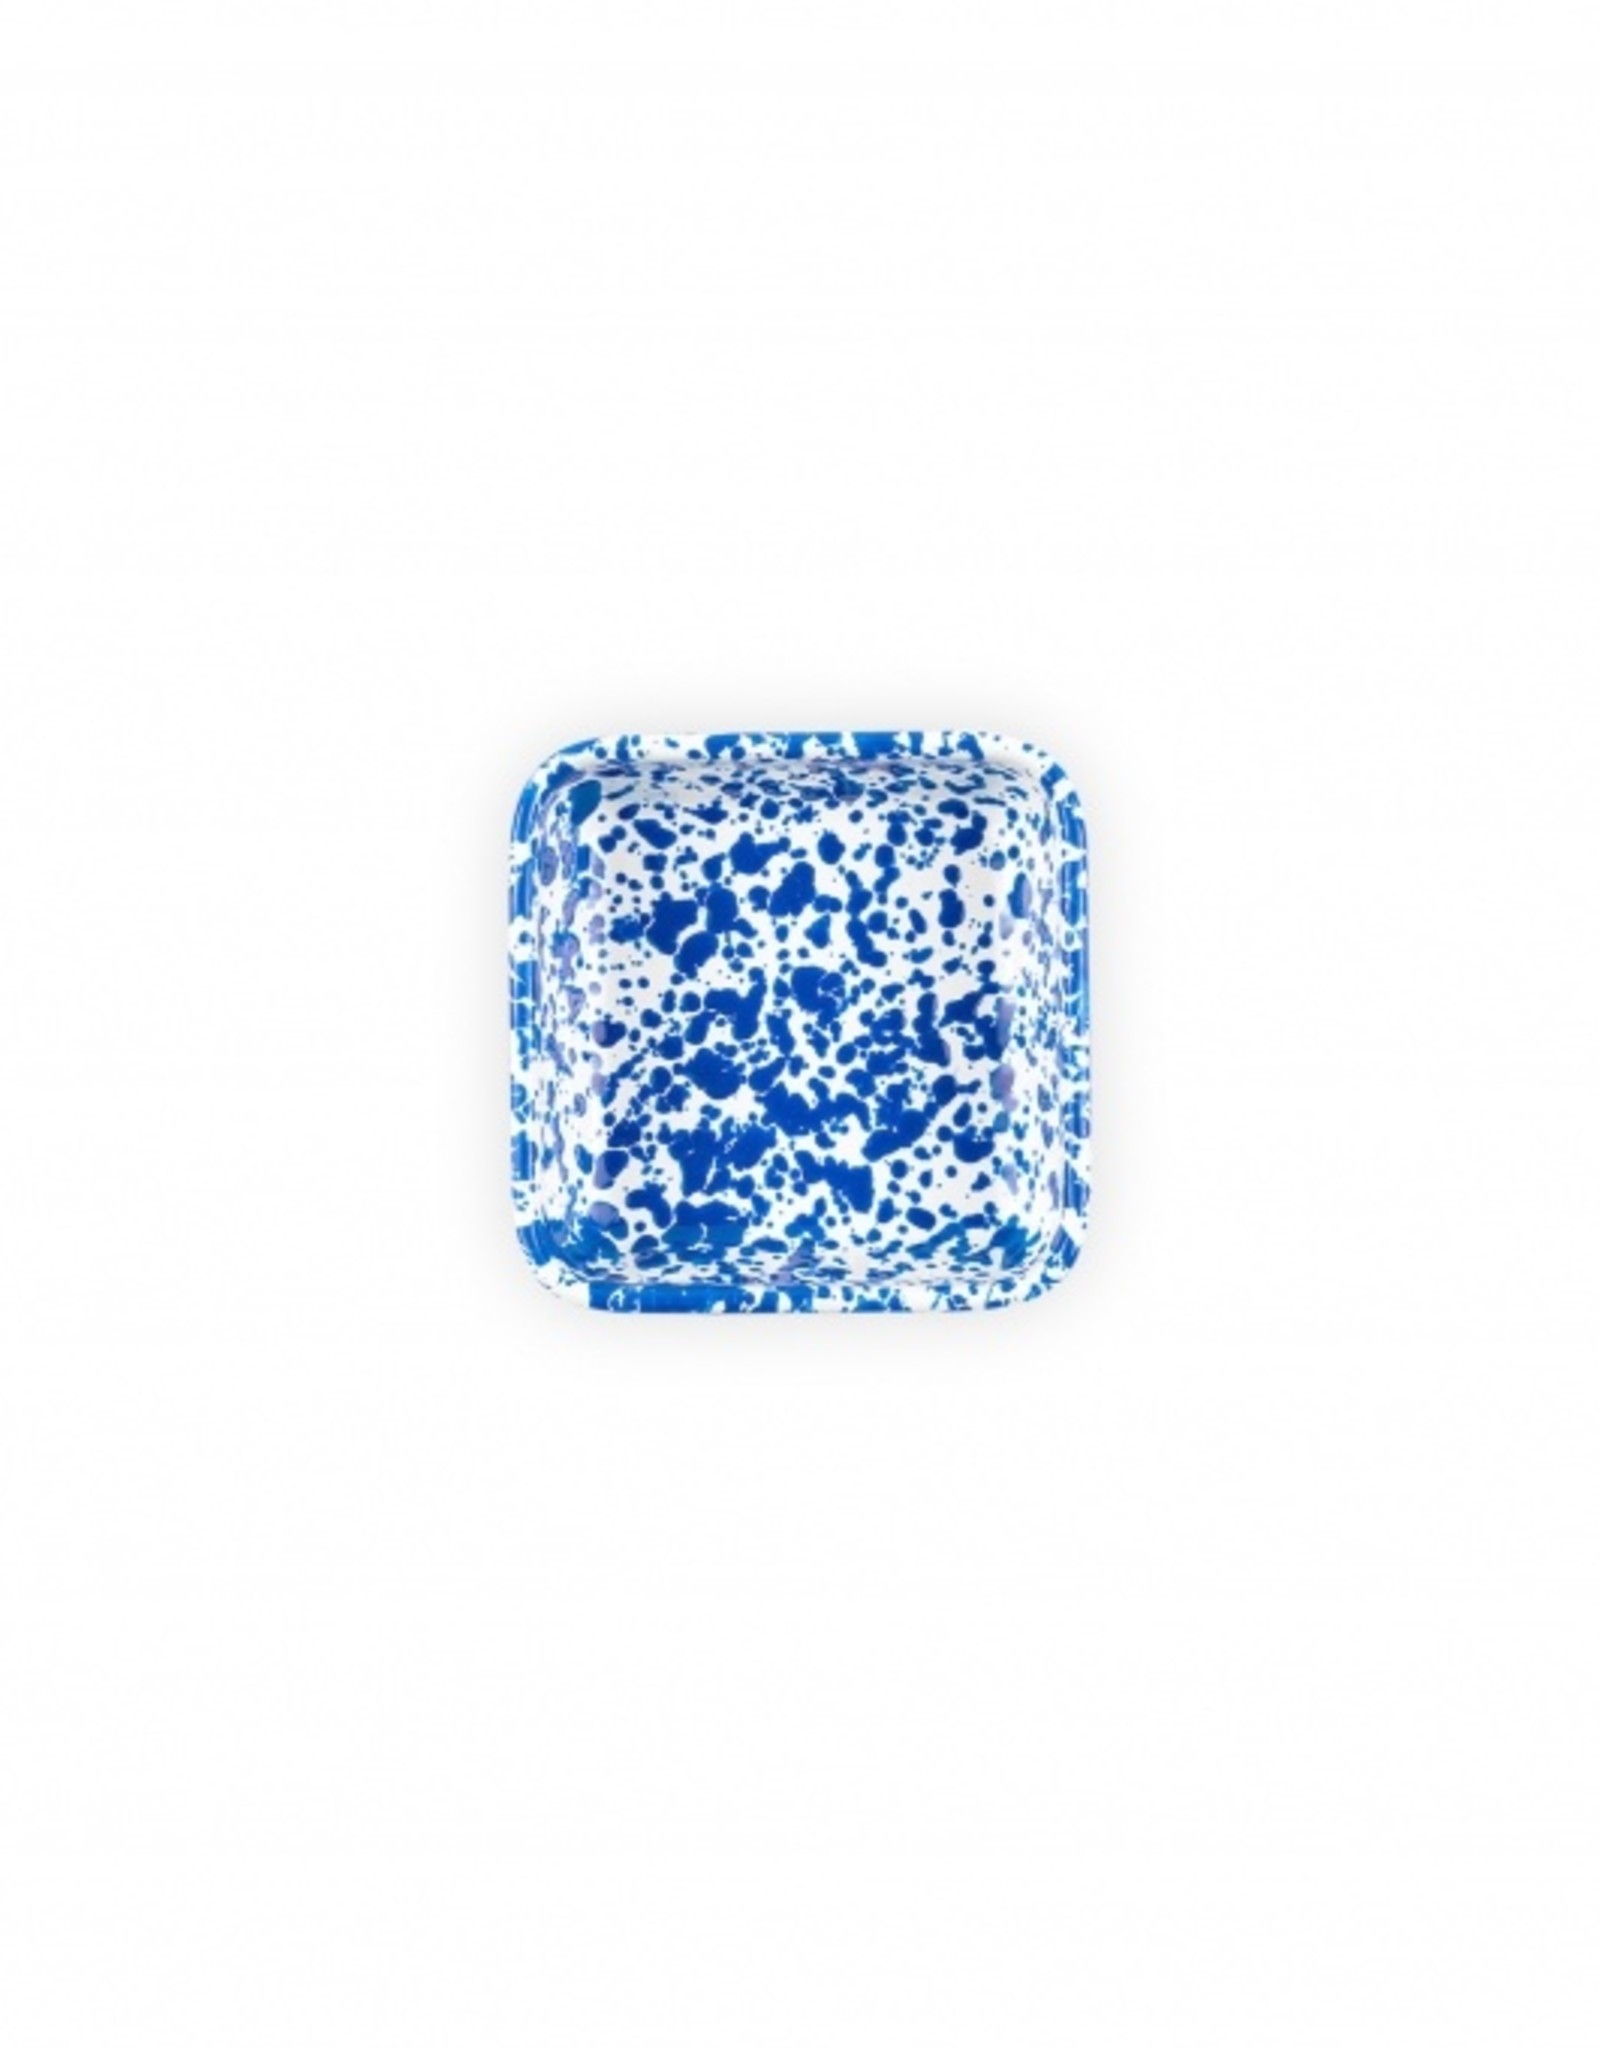 Crow Canyon Small Square Tray - Blue Splatter